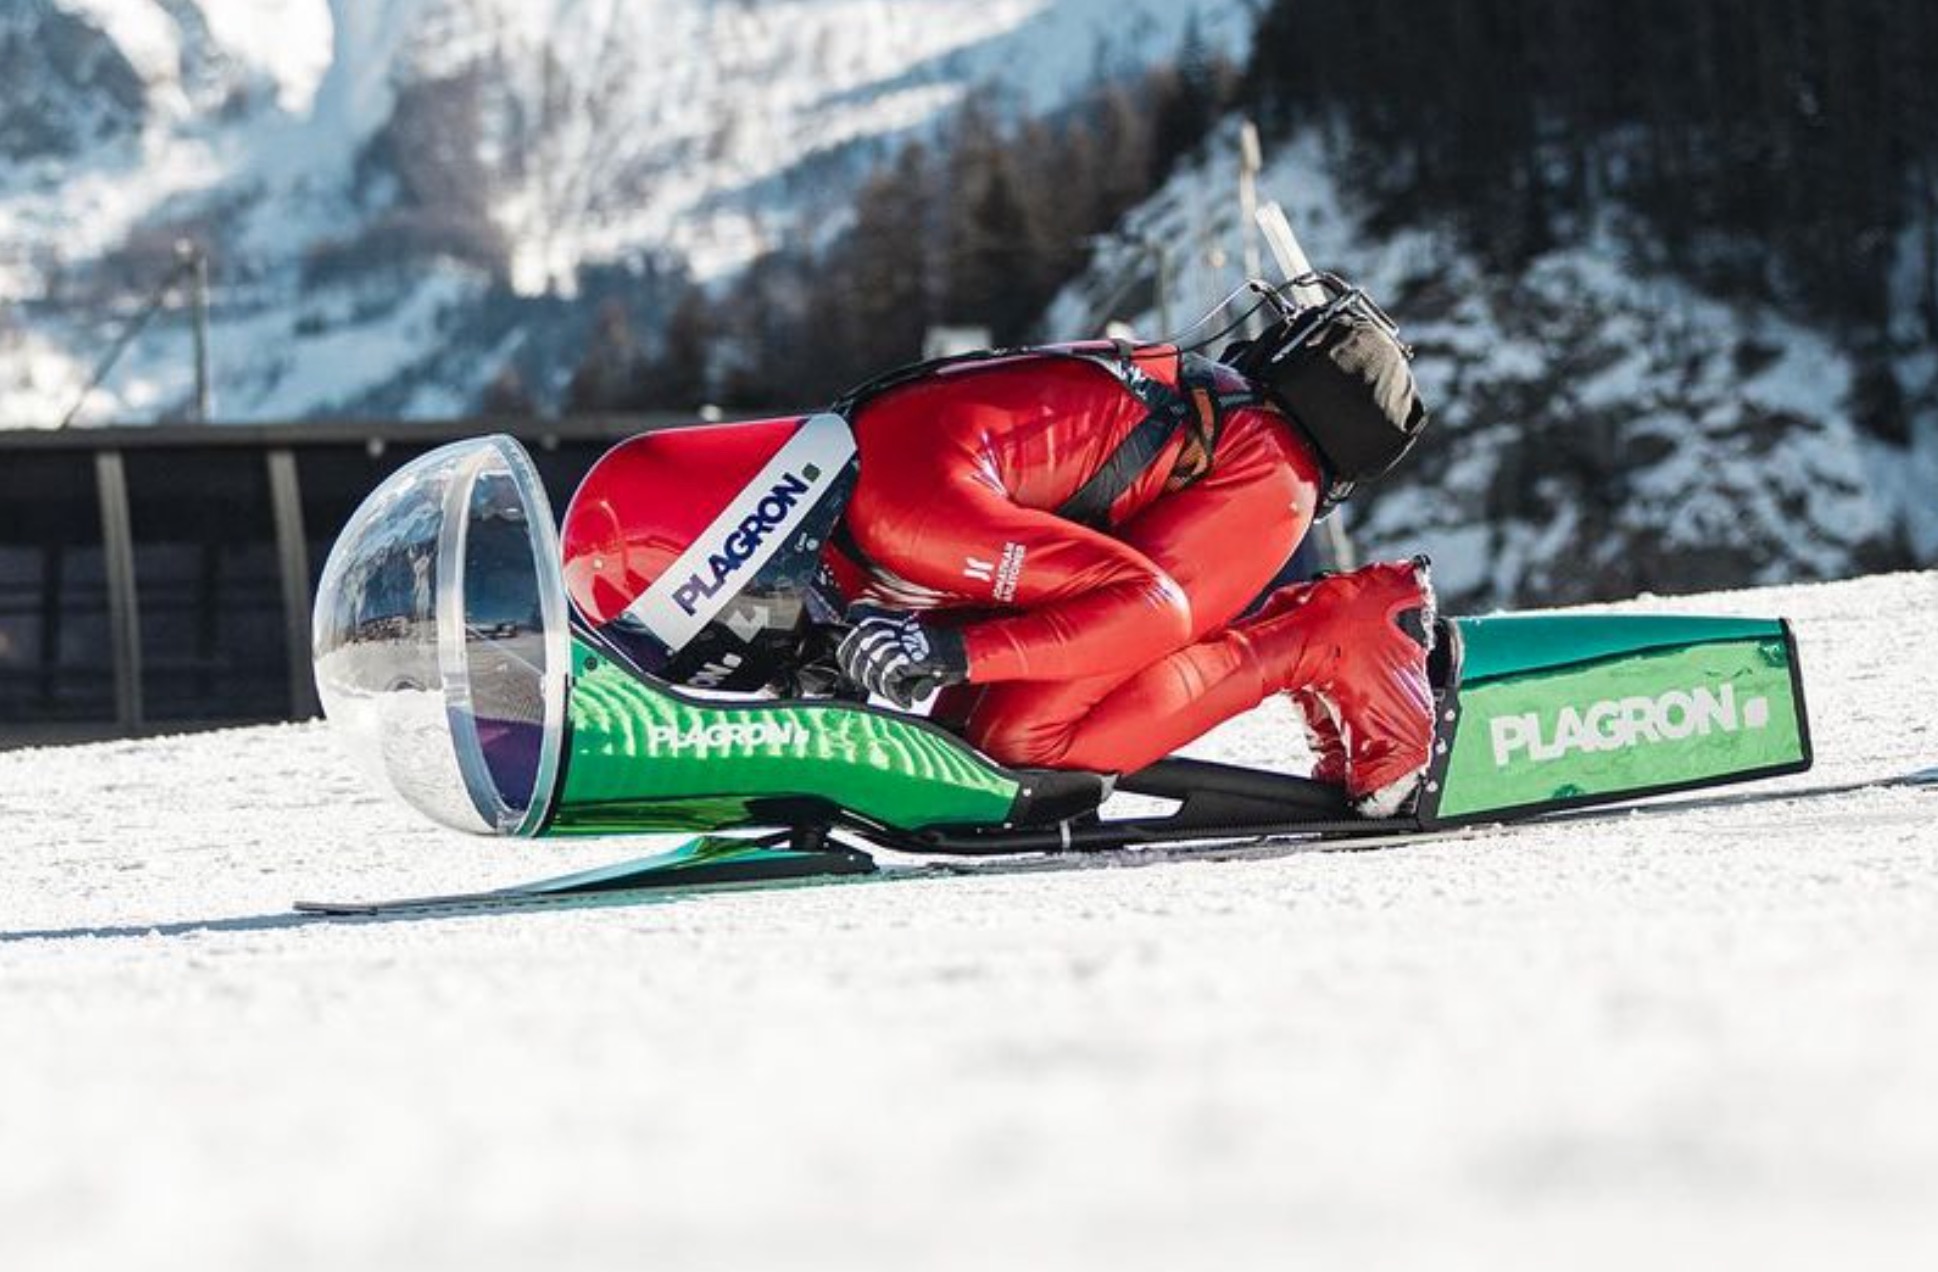 VIDEO: Snow-Scooter Attempts Speed Record With Parachute Strapped To Backside